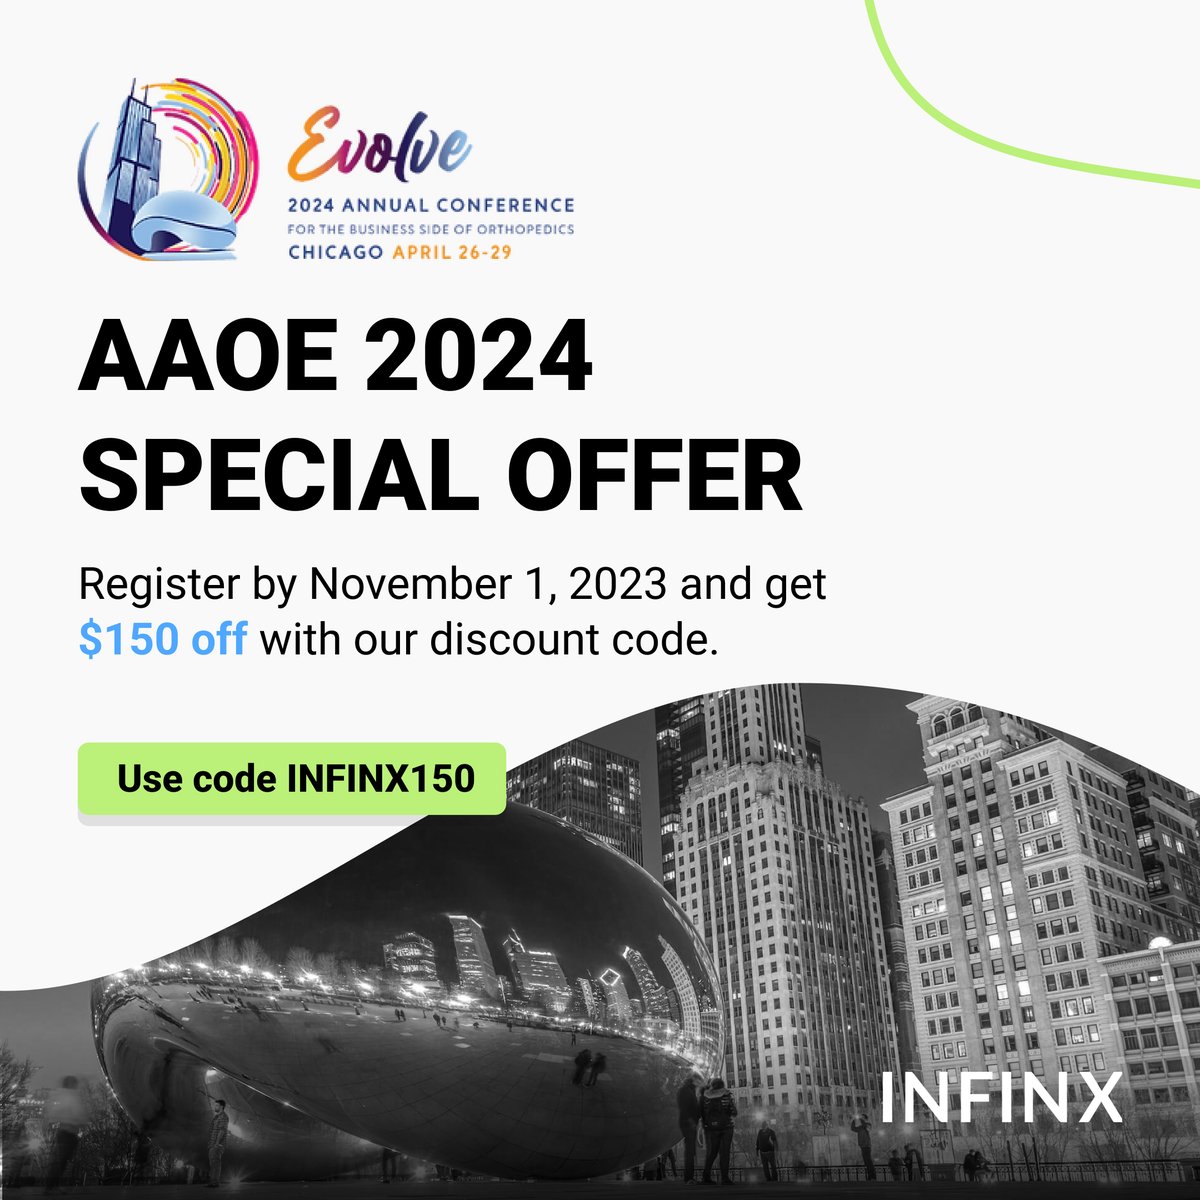 Save $150 on your registration for the AAOE Annual Conference in April 2024! Elevate your orthopedic practice by attending this to the next level, you don’t want to miss this conference.

Looking forward to seeing you at the conference next year!

#AAOE #AAOE2024 #OrthopedicRCM